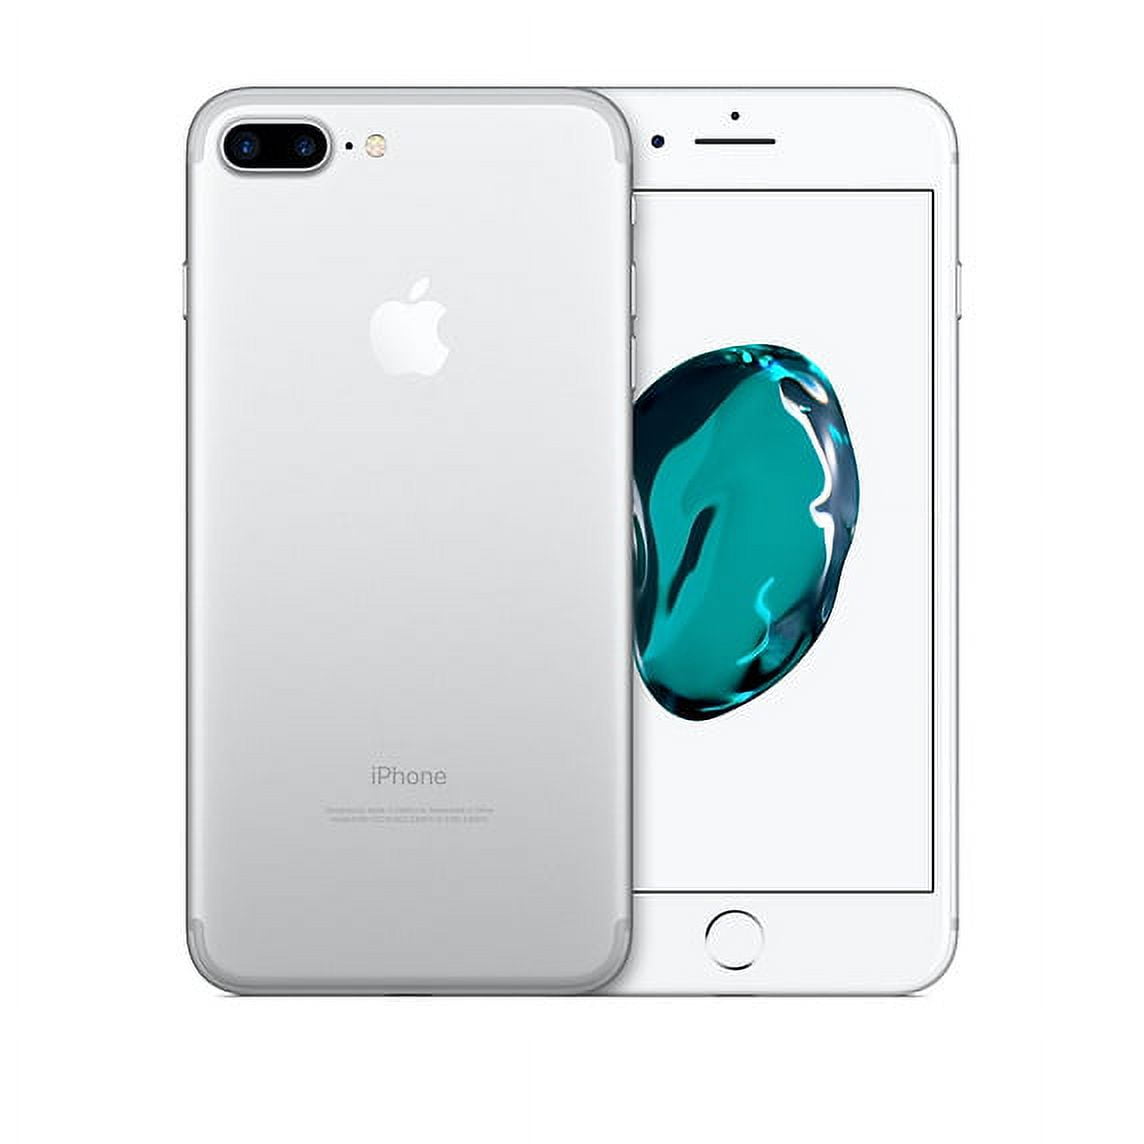 Restored Apple iPhone 7 Plus 128GB, Silver - AT&T (Refurbished) 